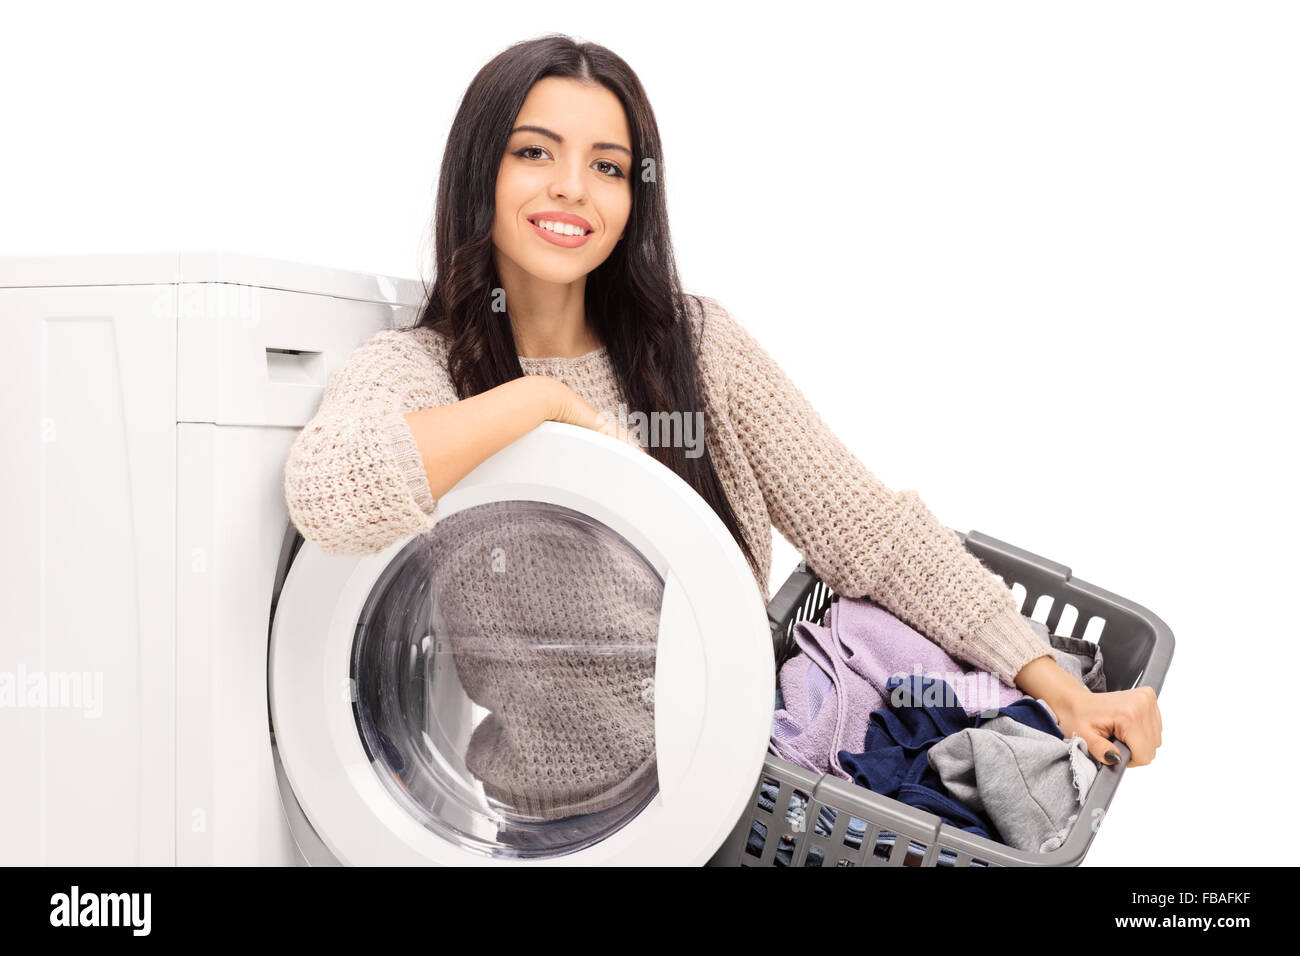 Young cheerful housewife holding a laundry basket and posing next to a washing machine isolated on white background Stock Photo